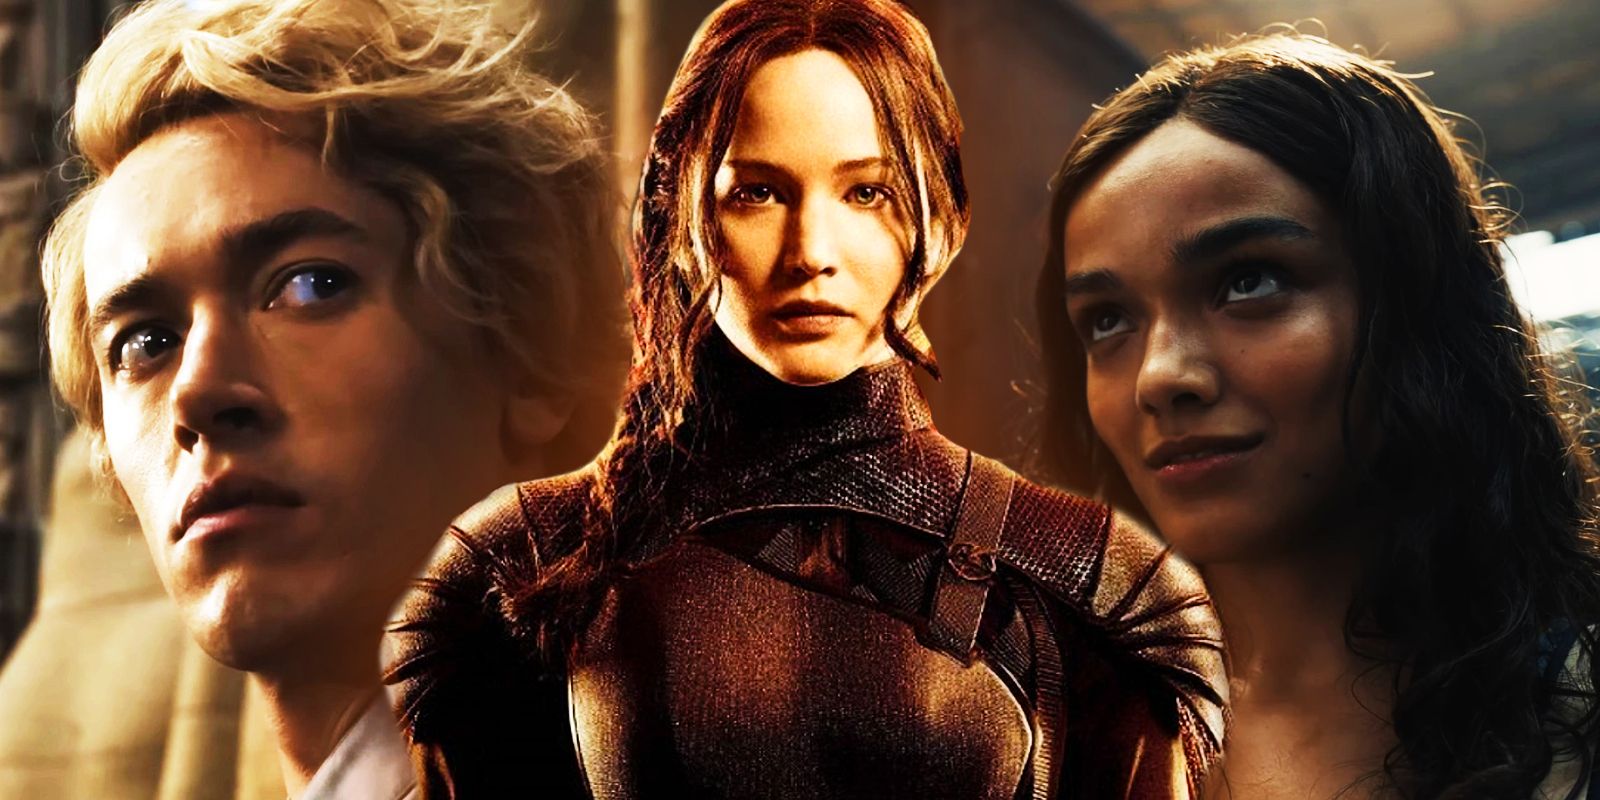 A blended image features Katniss over a young Coriolanus and Lucy Gray in the Hunger Games franchise